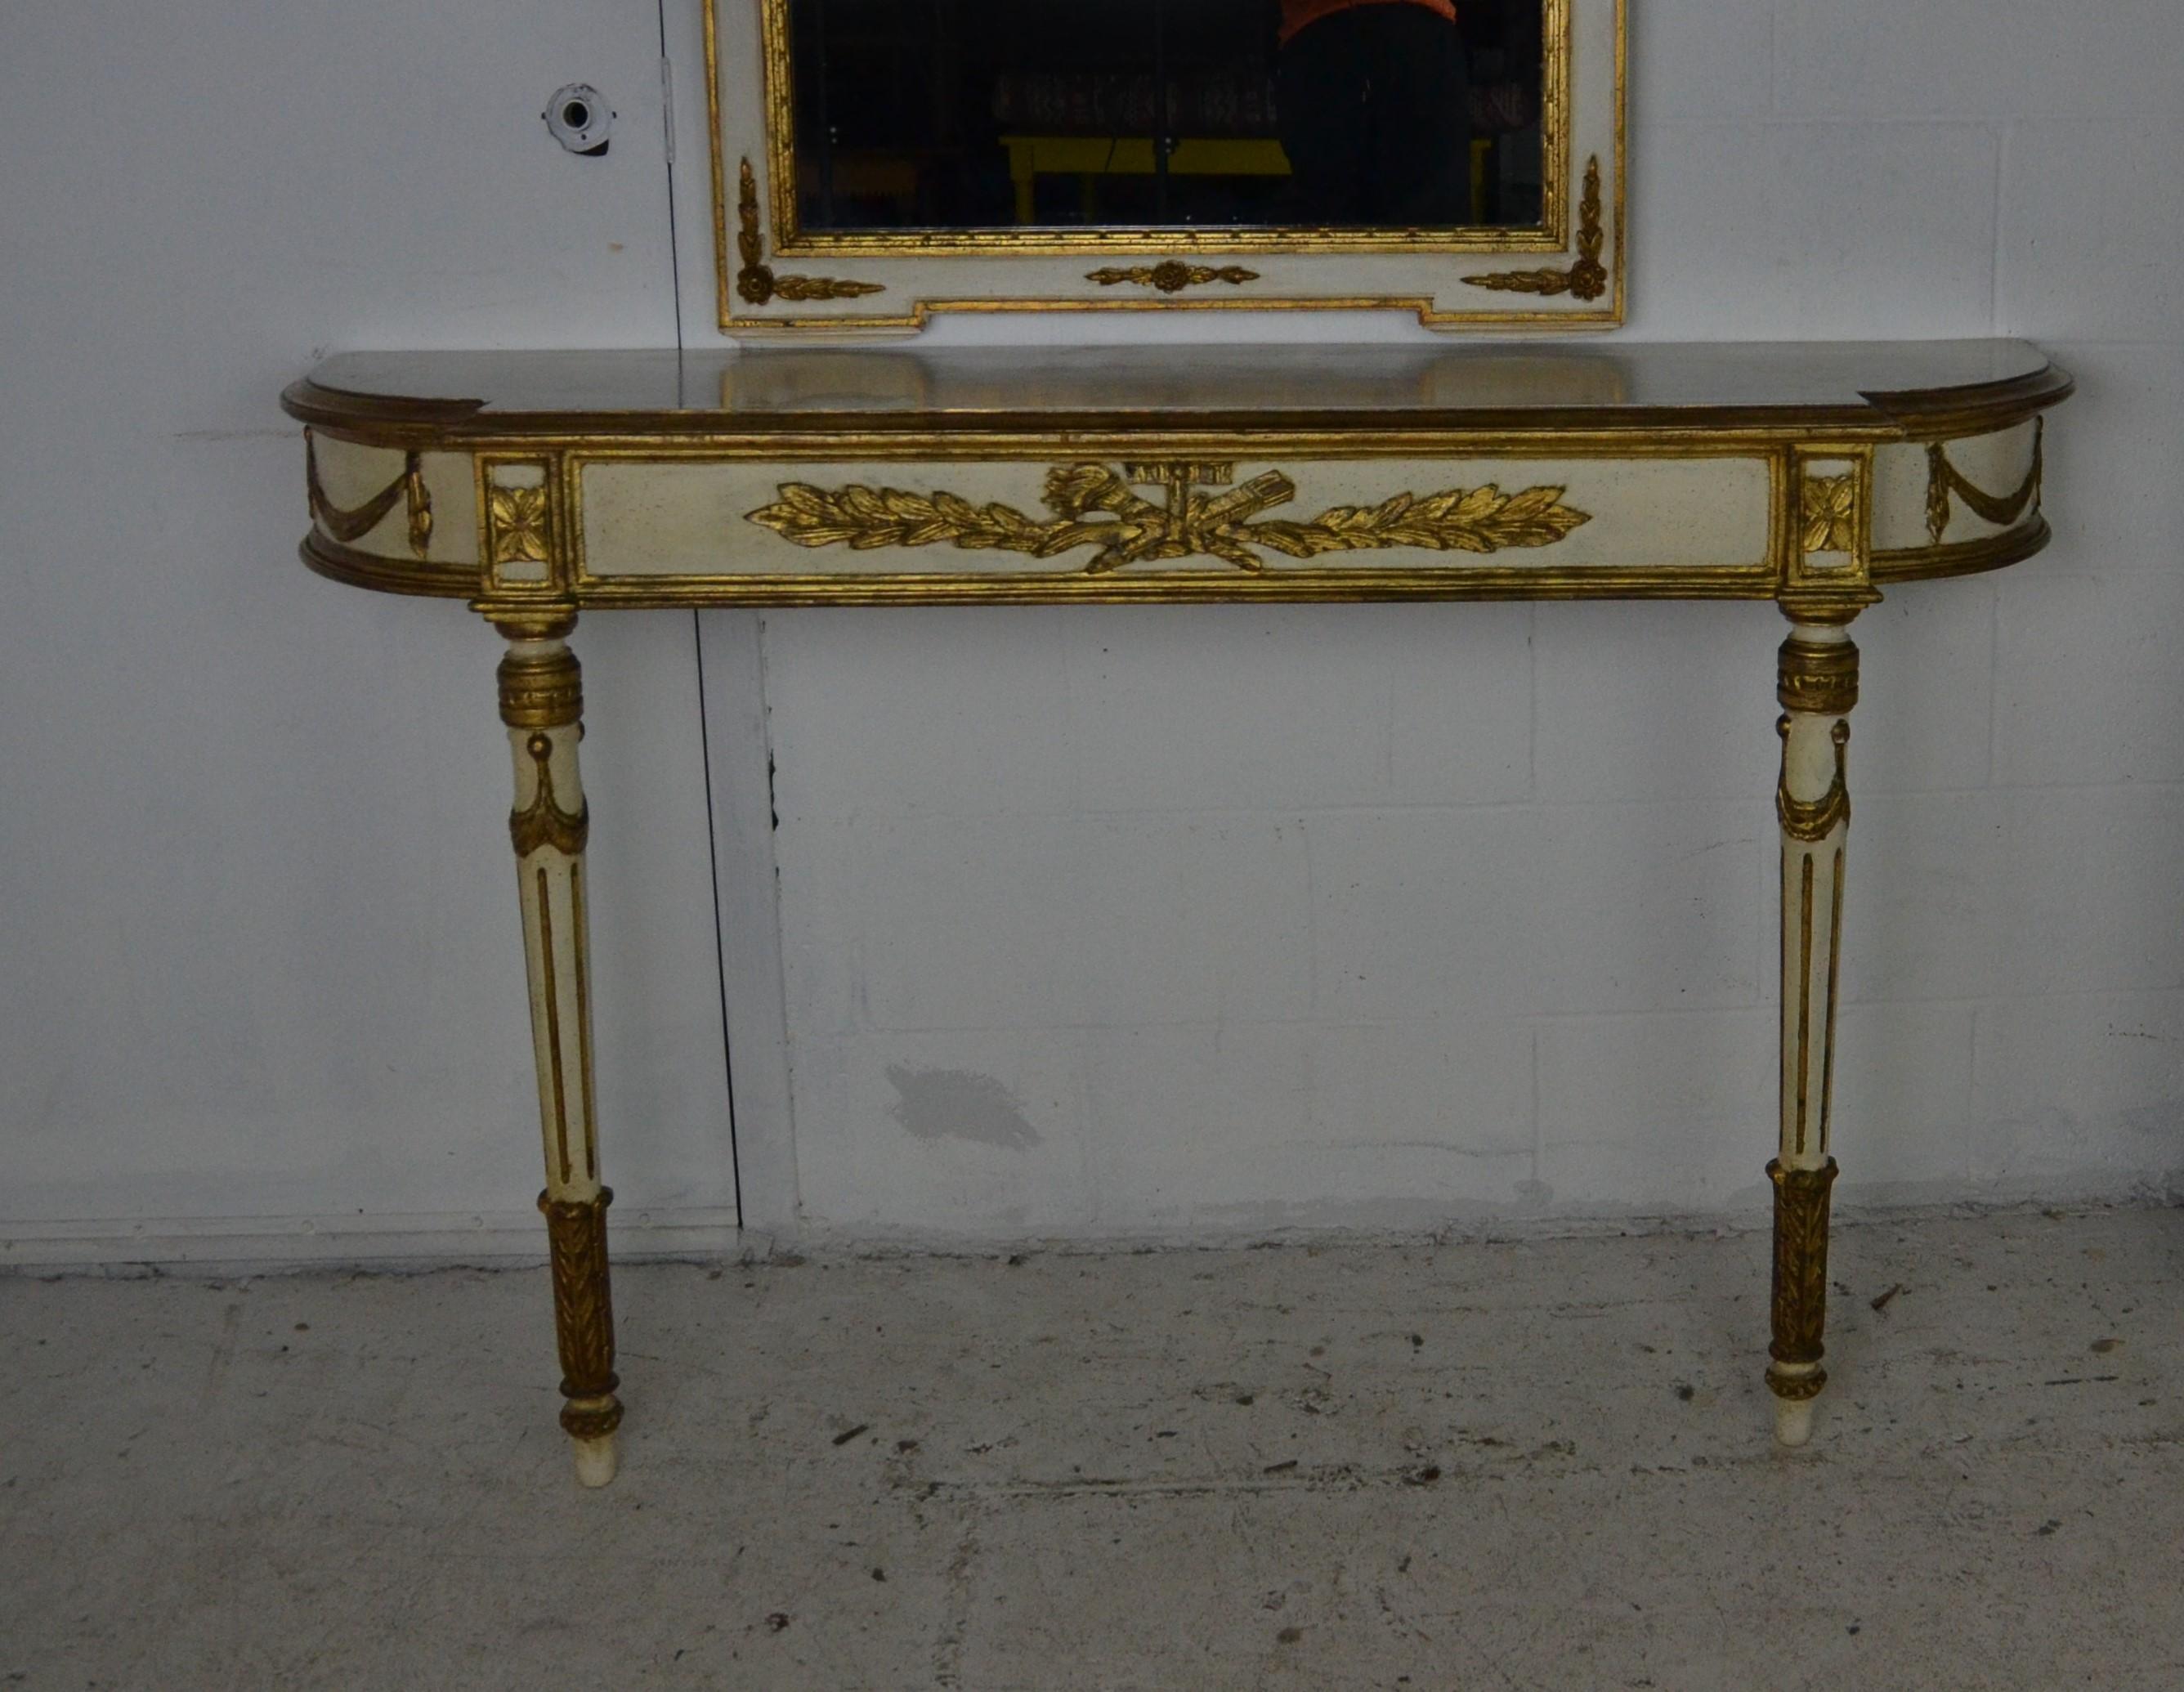 A console and mirror in the Louis XVI style. Original paint finish with gilt decorations.